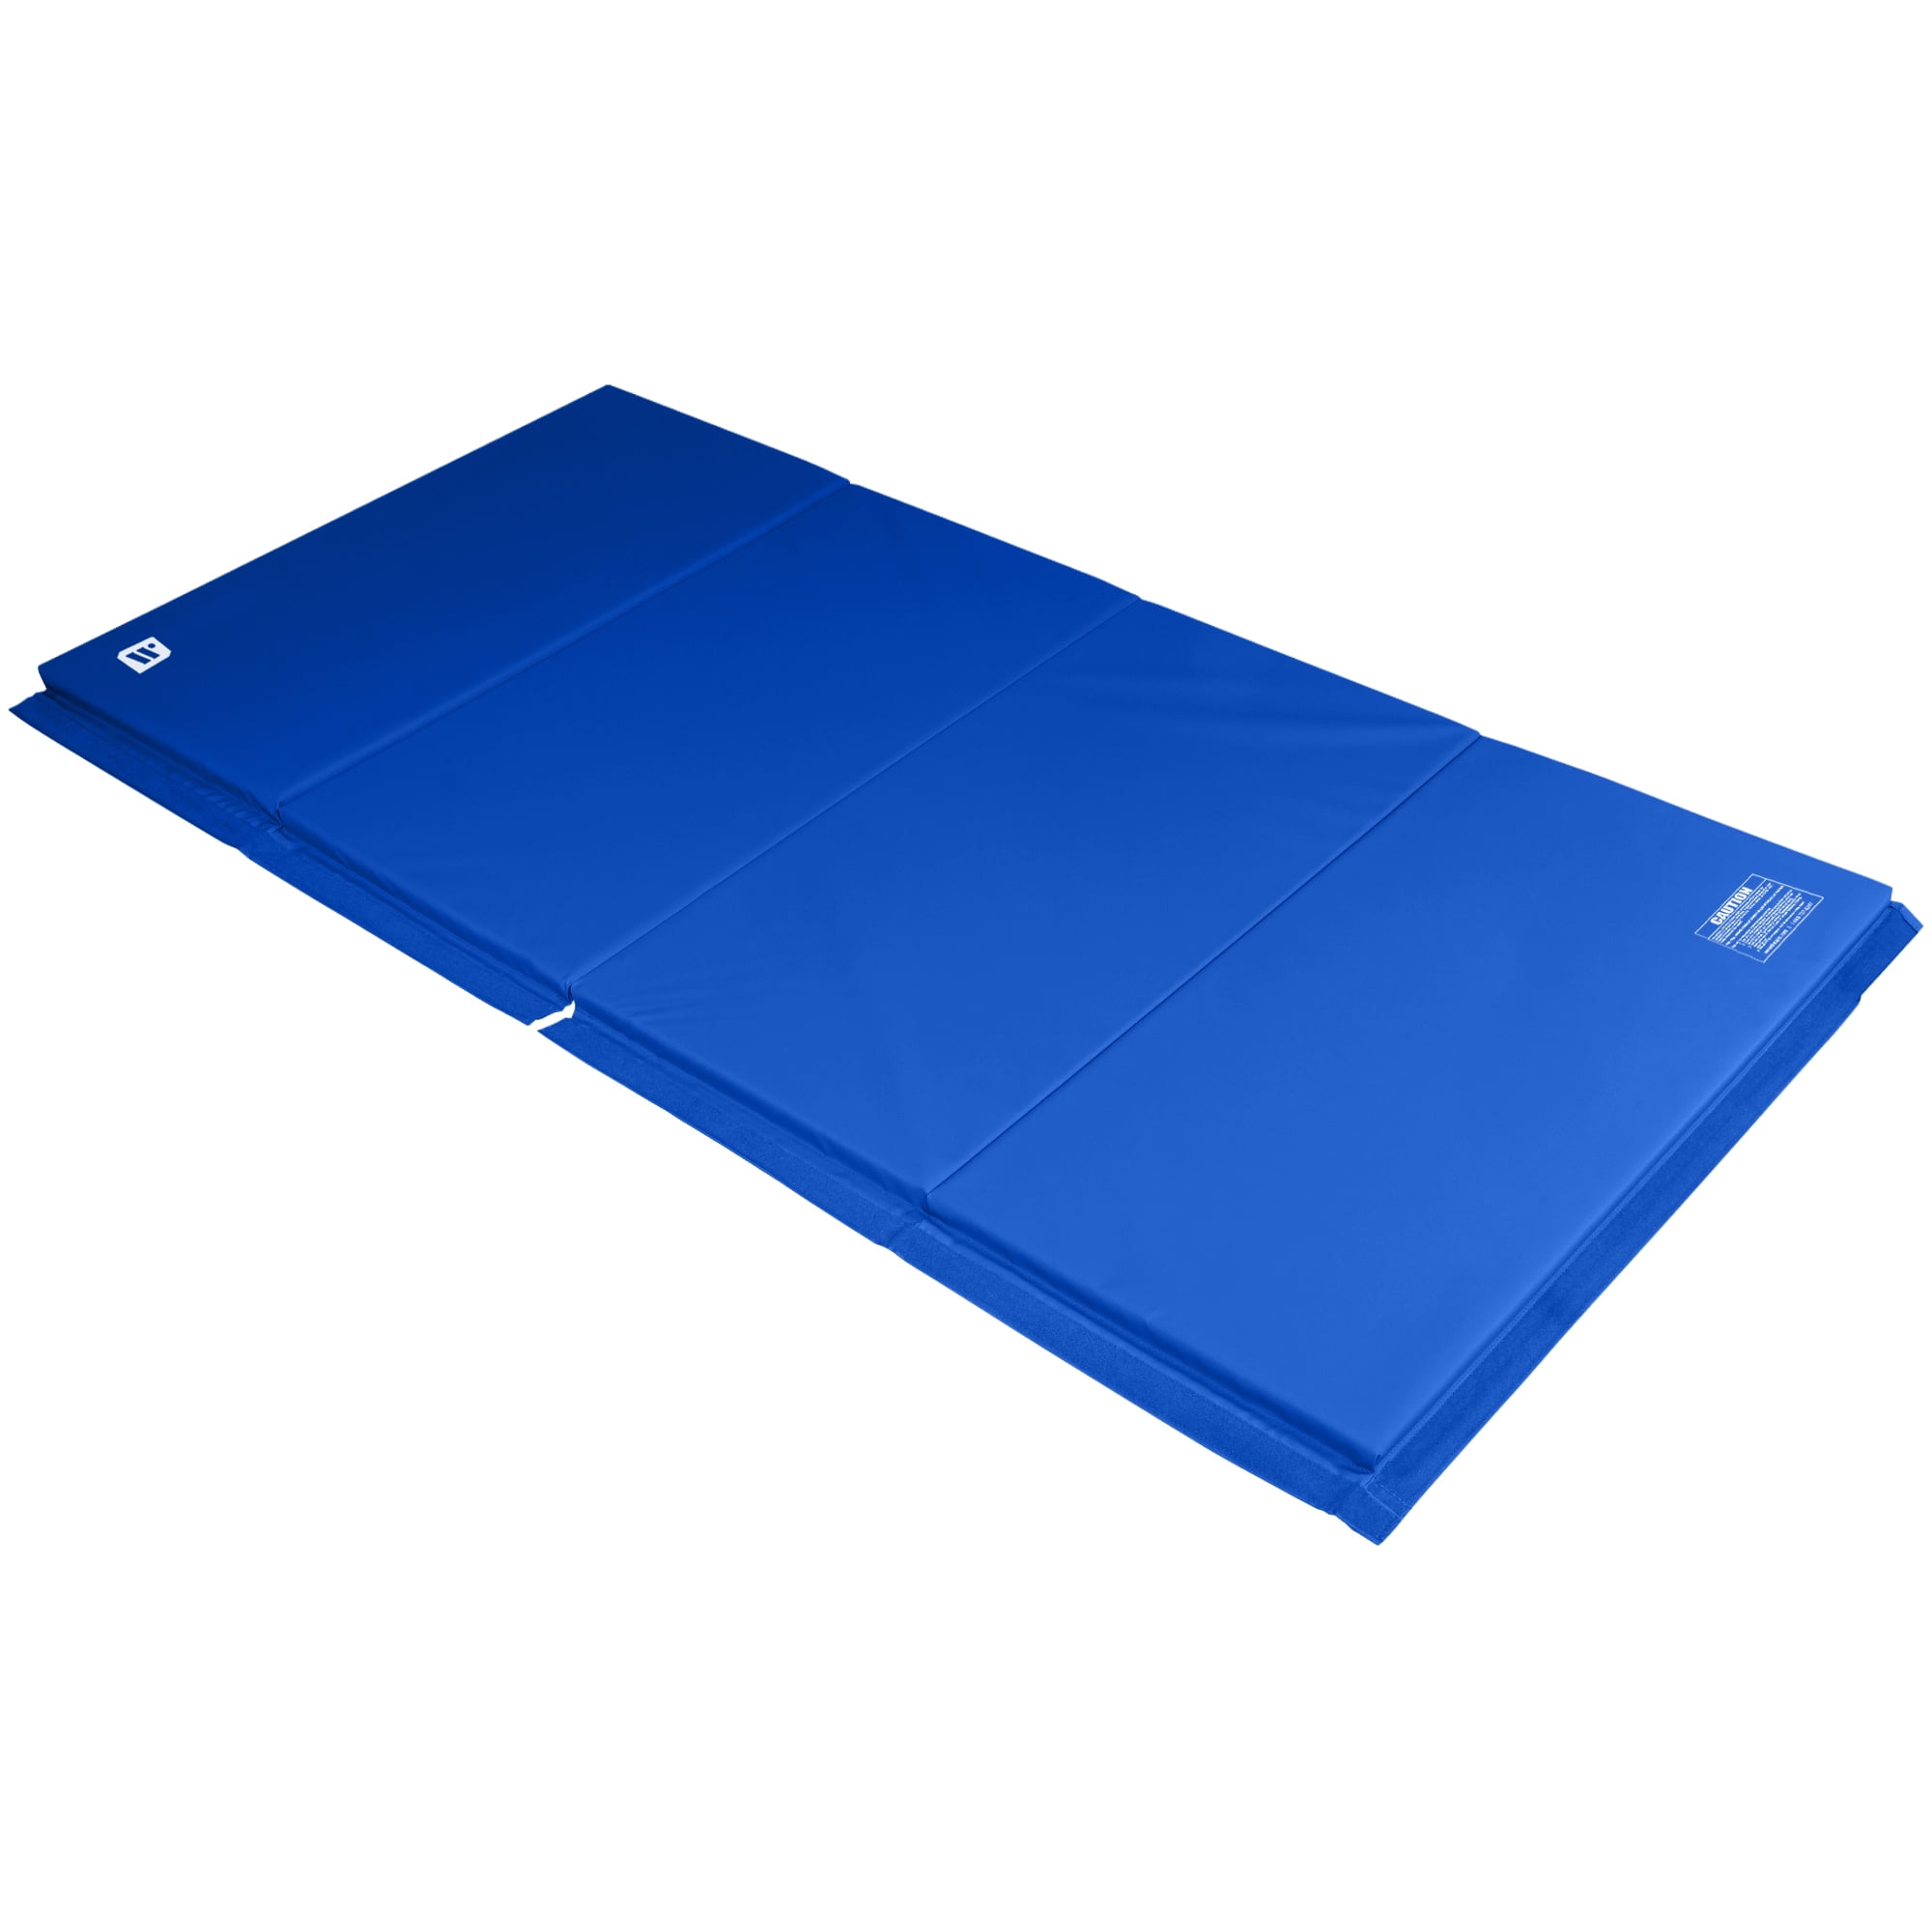 We Sell Mats 2 ft x 6 ft x 1 5/8 in Personal Folding Exercise Mat